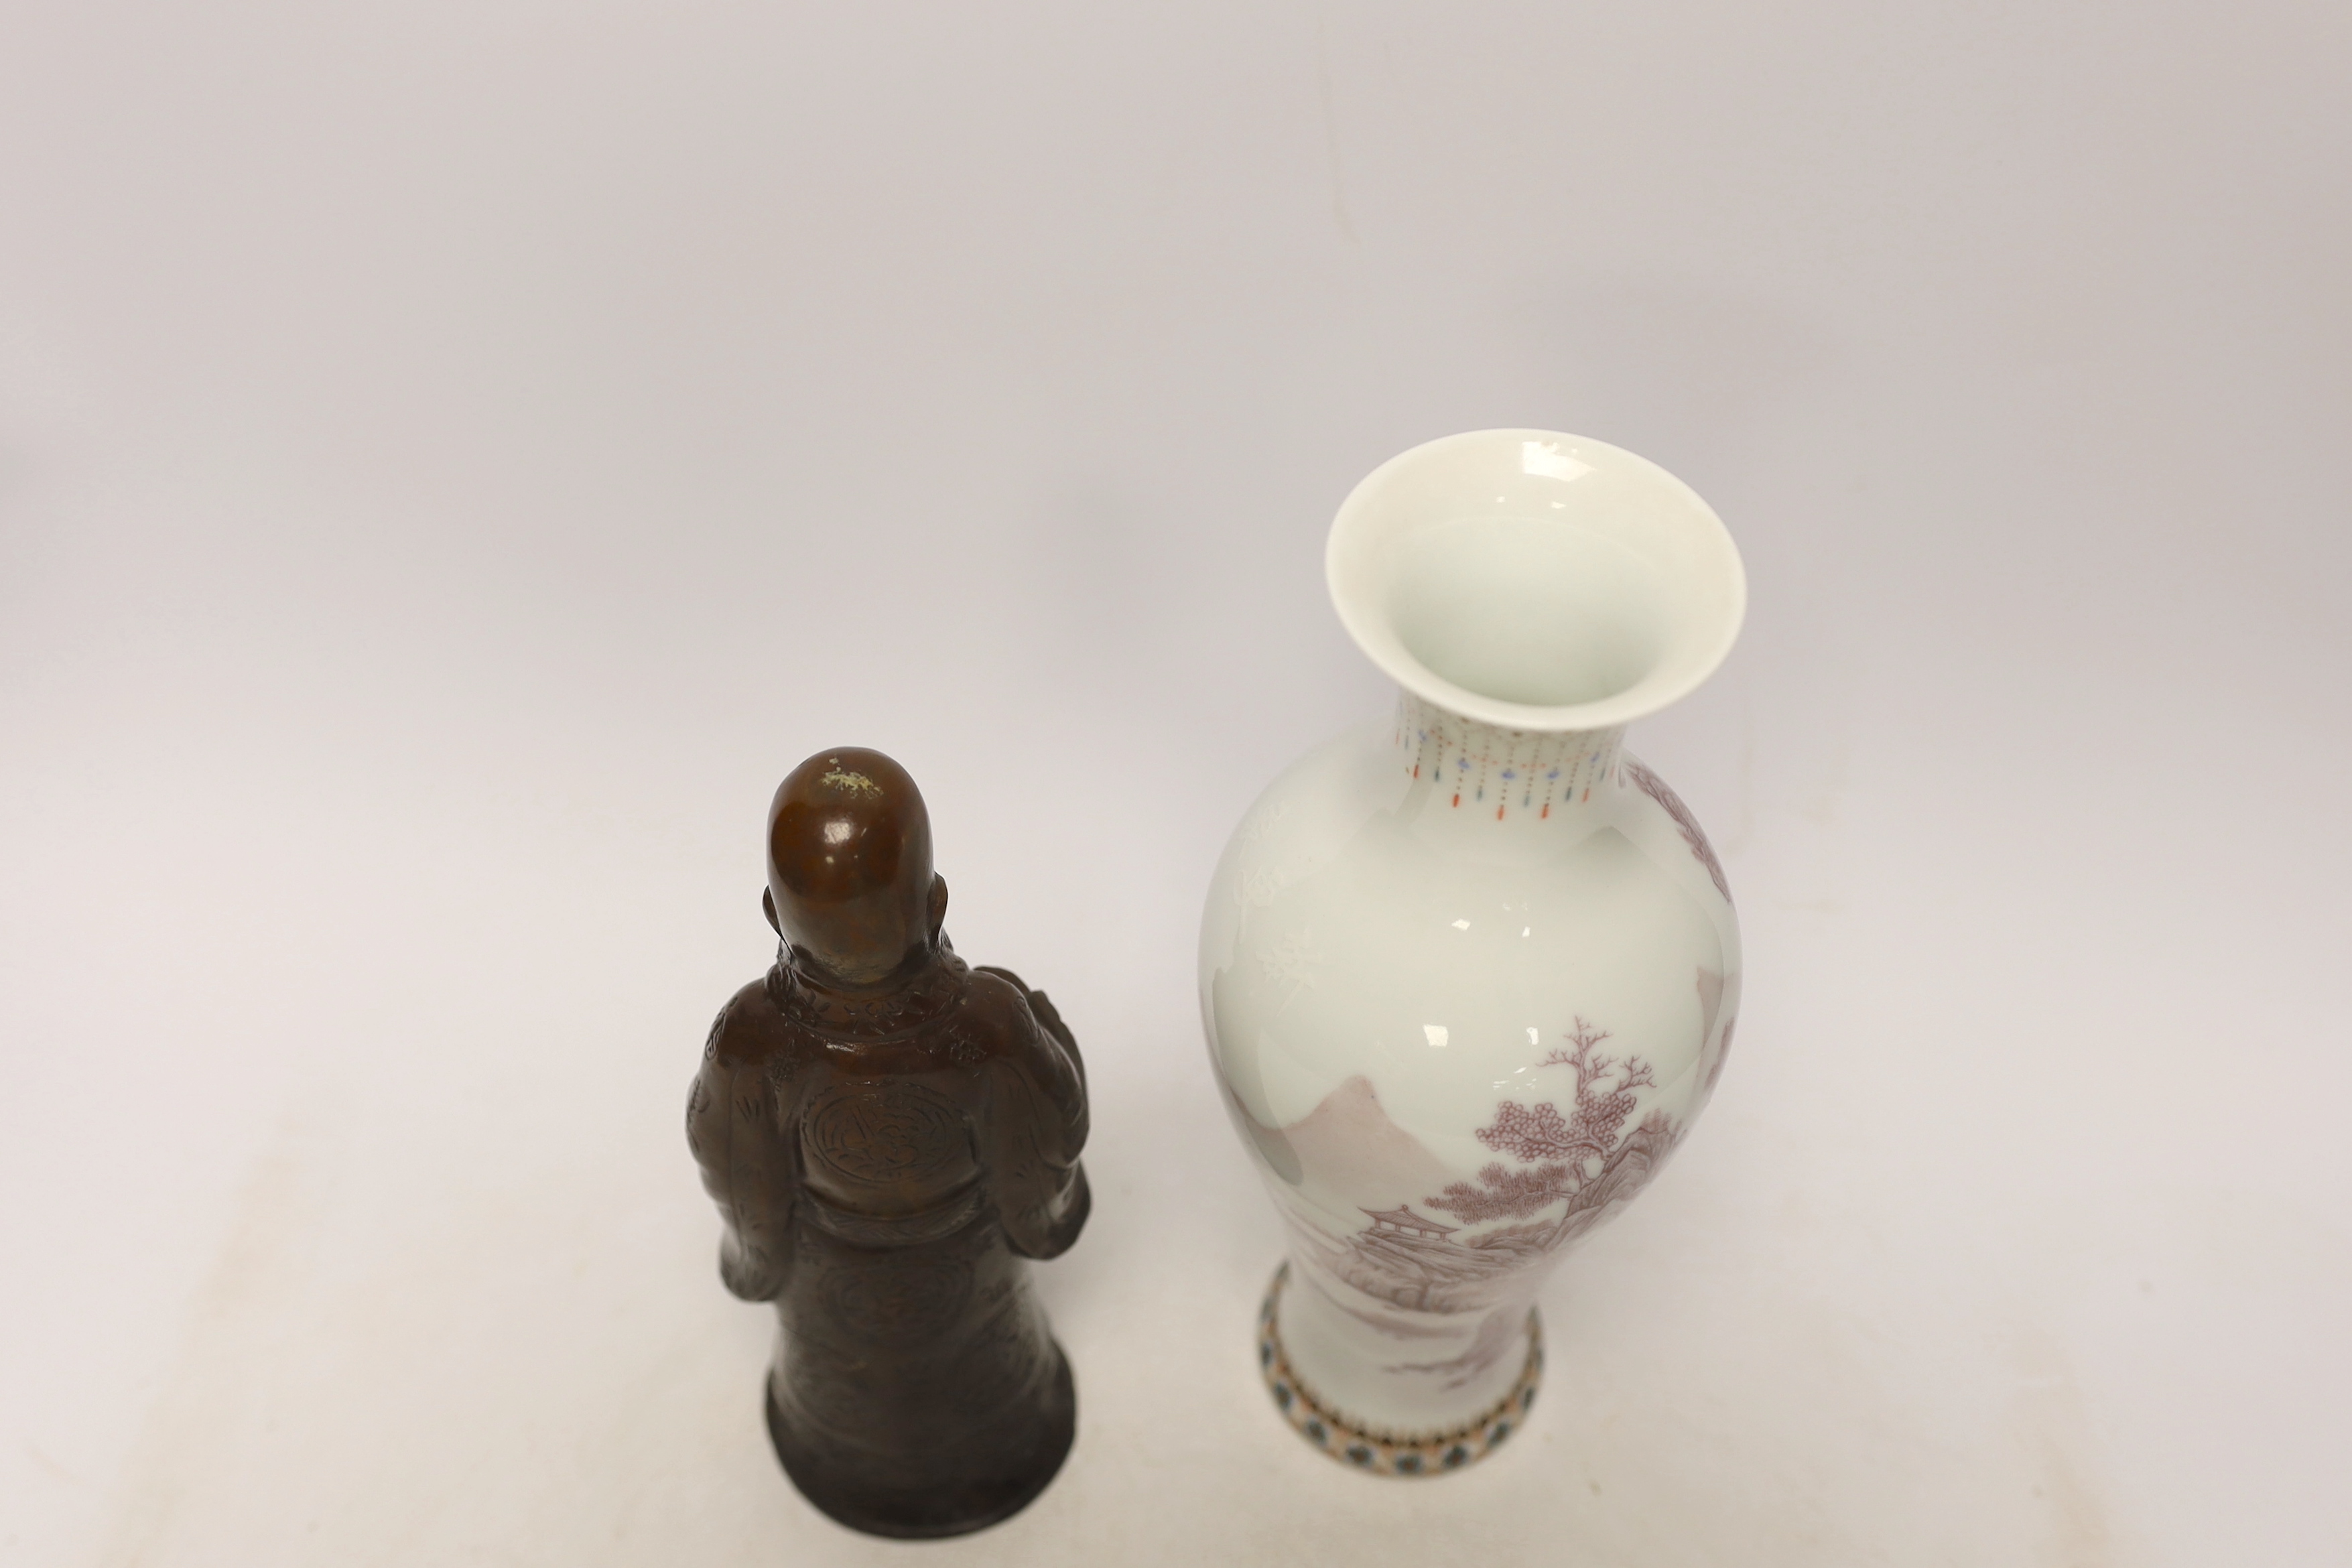 A Chinese bronze figure of Shou Lao and a Chinese Republic period vase, 1991, largest 26cm high - Image 3 of 4